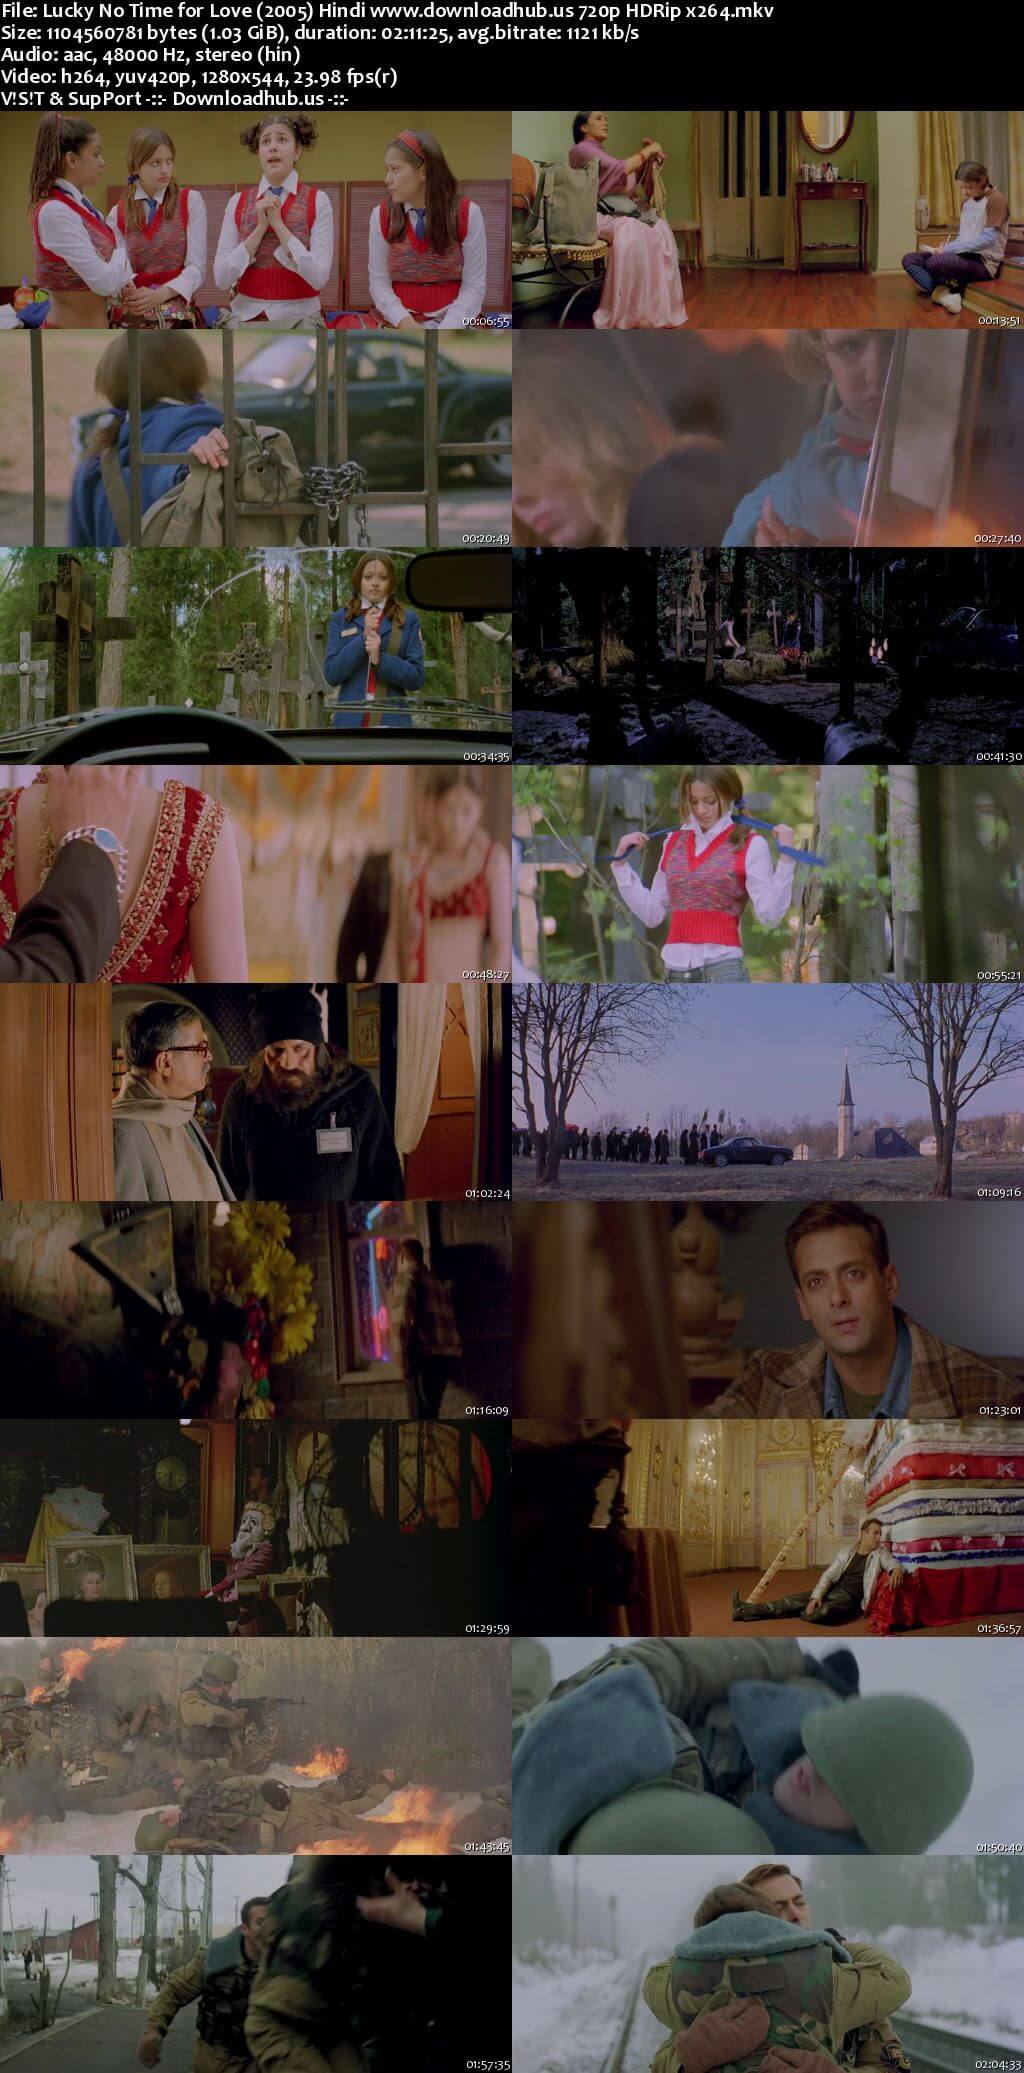 Lucky No Time for Love 2005 Hindi 720p 480p HDRip x264